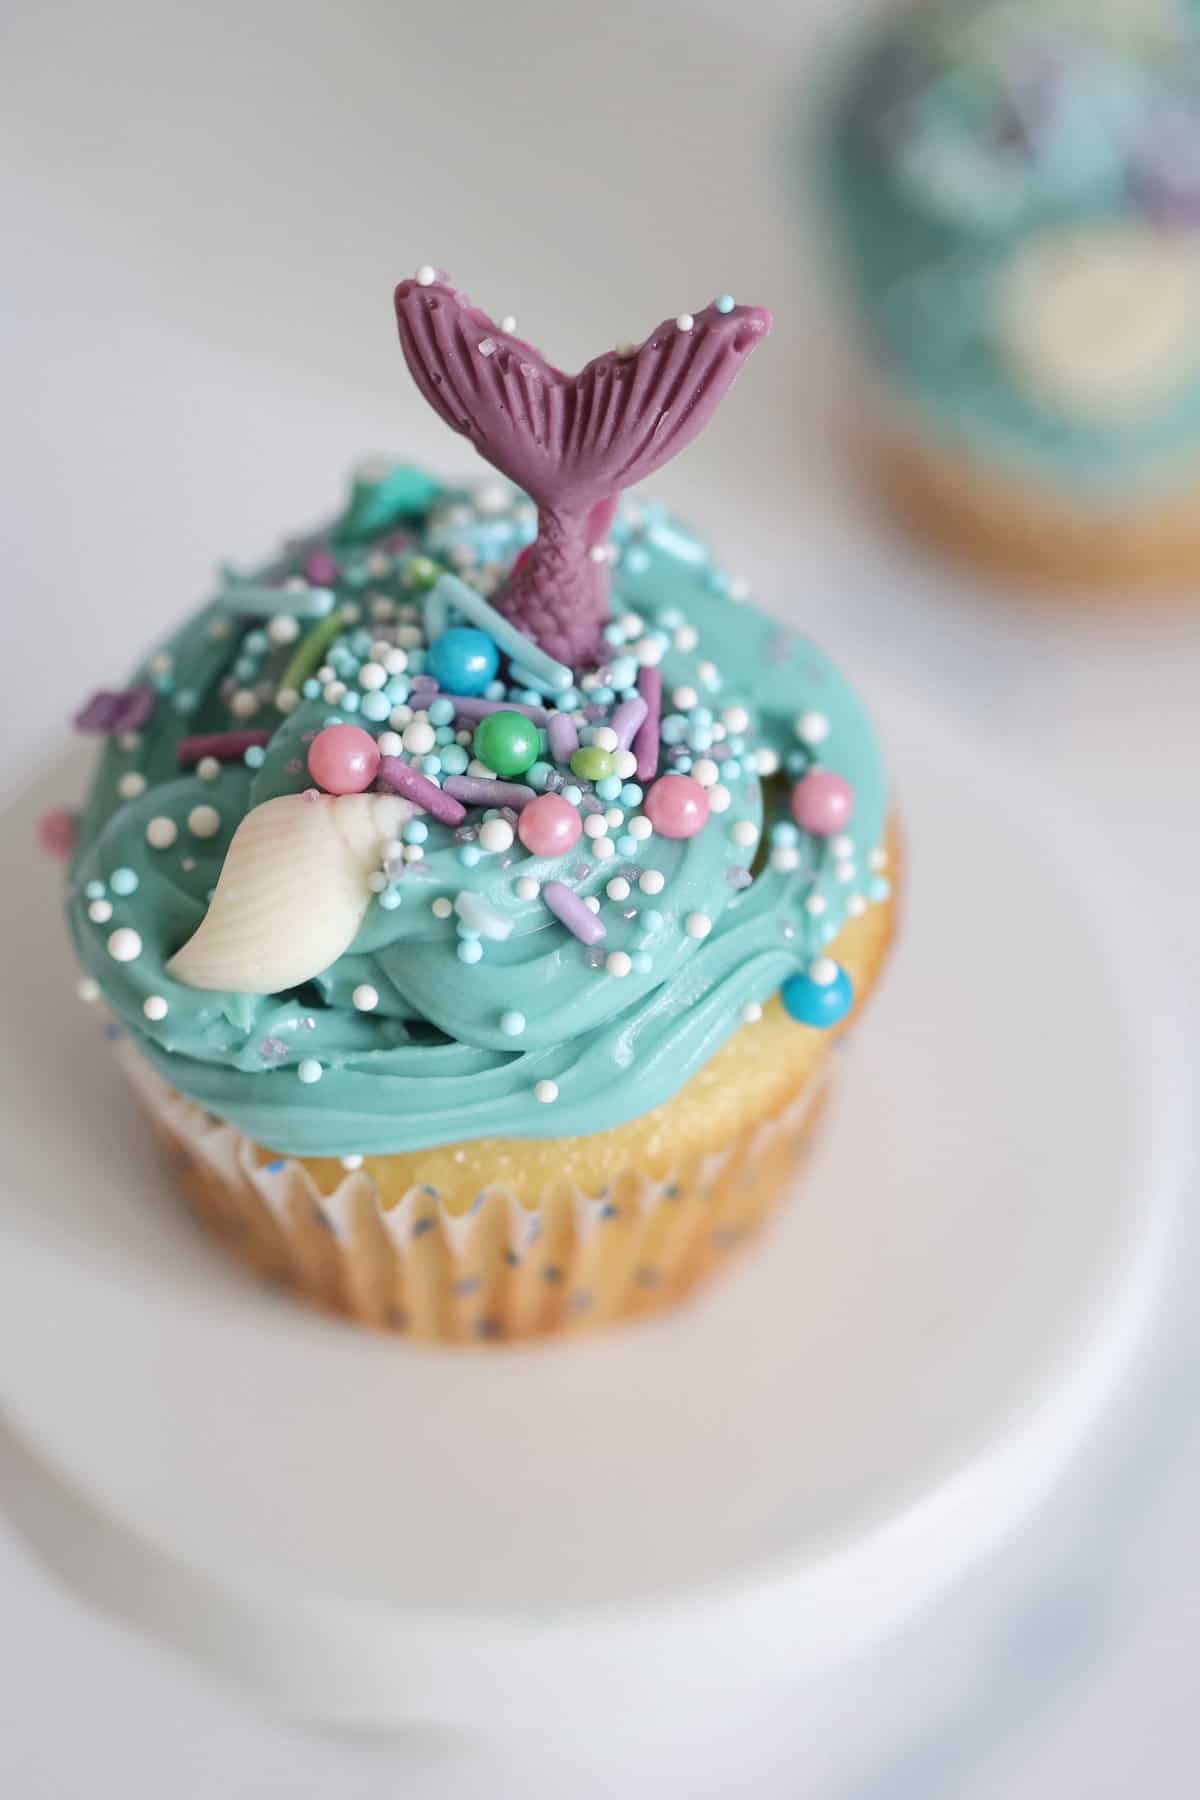 mermaid cupcake with a purple tail blue icing and mermaid sprinkles on a cake stand